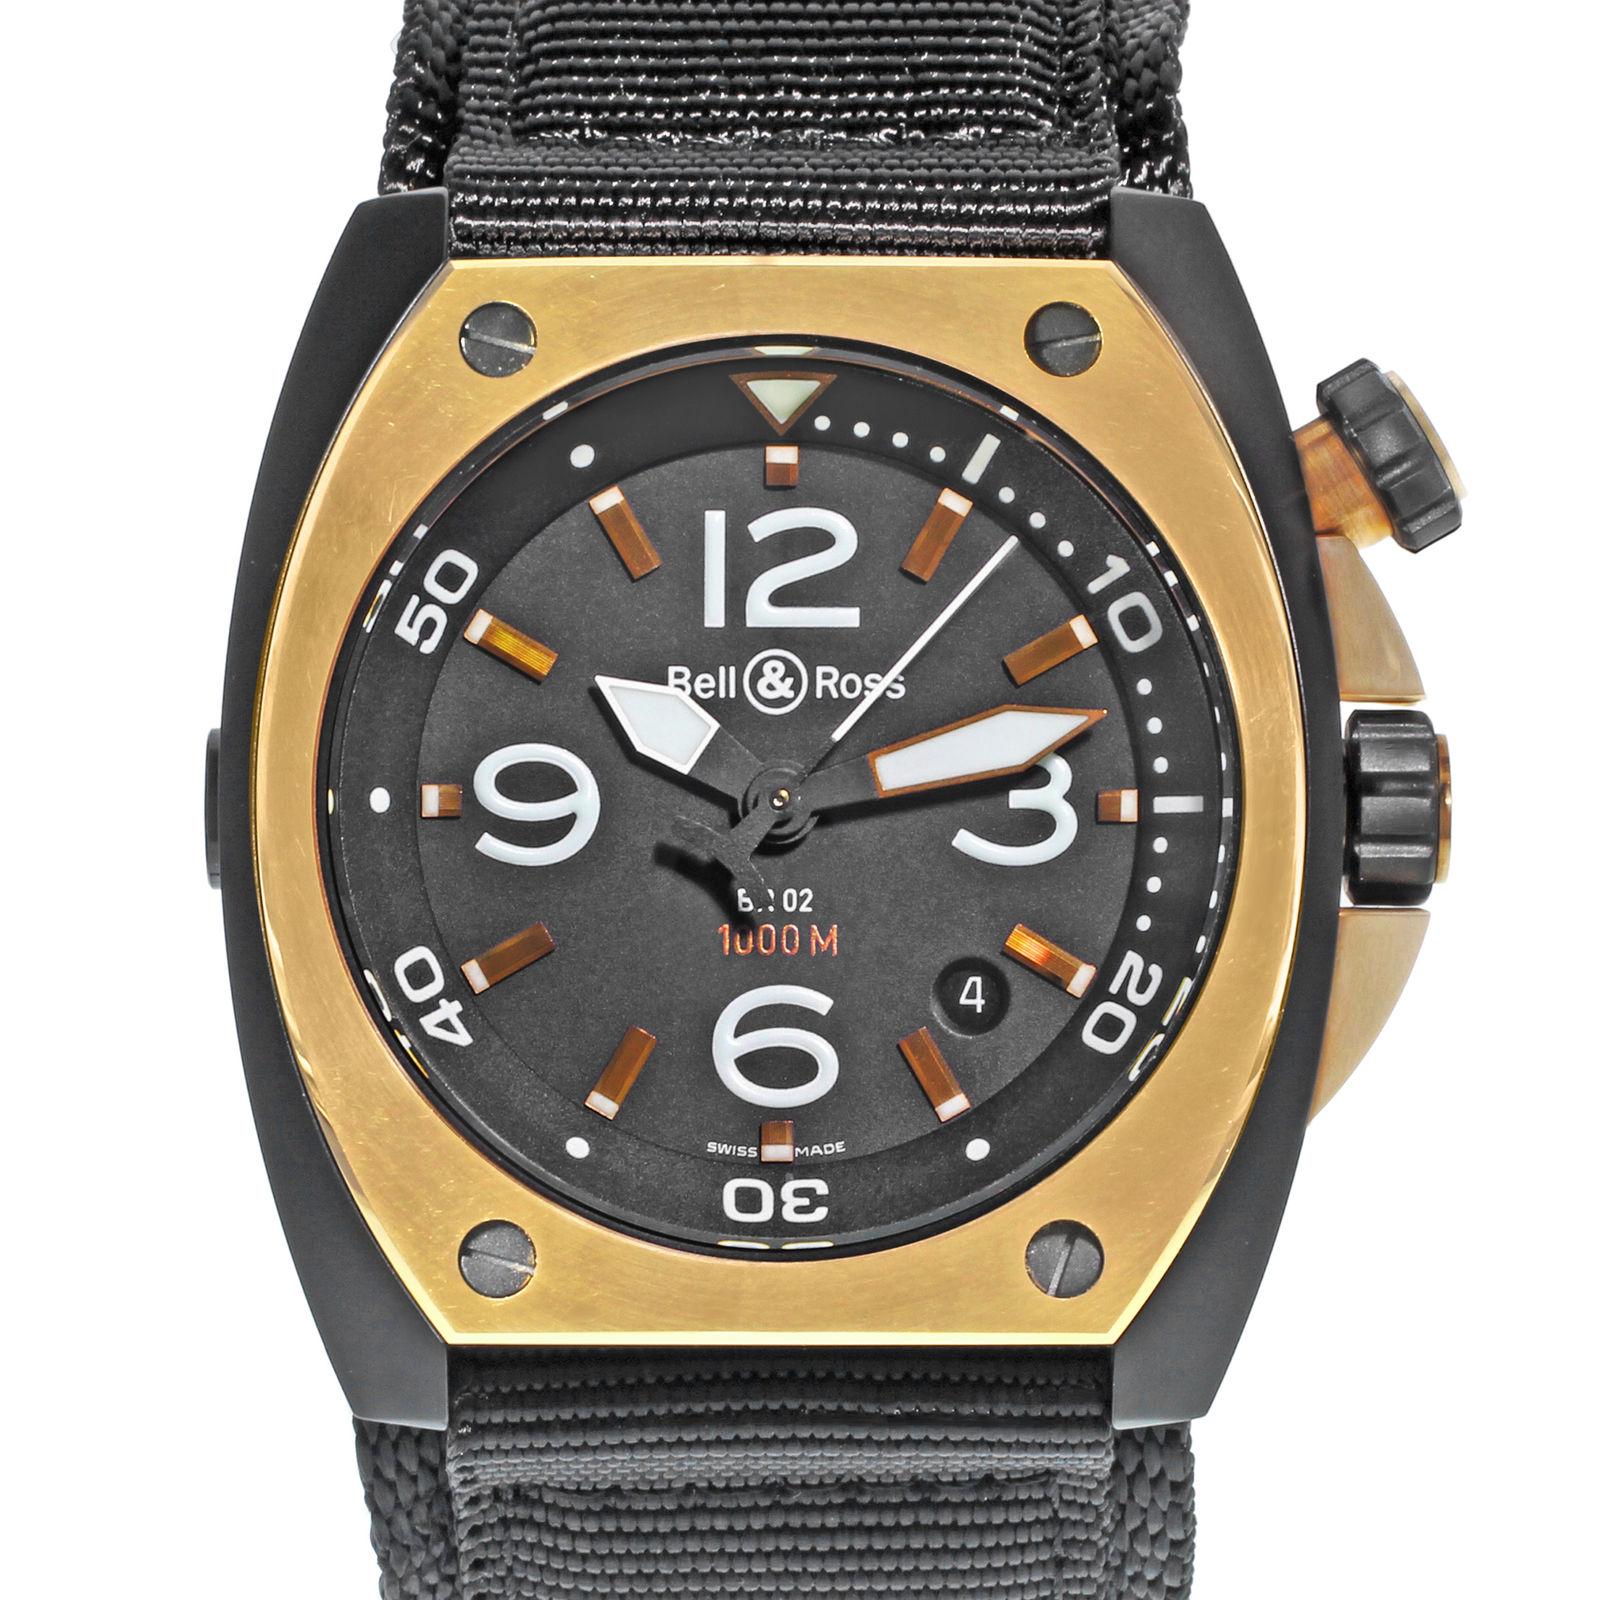 (20691)
This New With Defects Bell & Ross Marine BR02‑PINKGOLD‑CA is a beautiful men's timepiece that is powered by an automatic movement which is cased in a stainless steel case. It has a tonneau shape face, date dial and has hand sticks & numerals